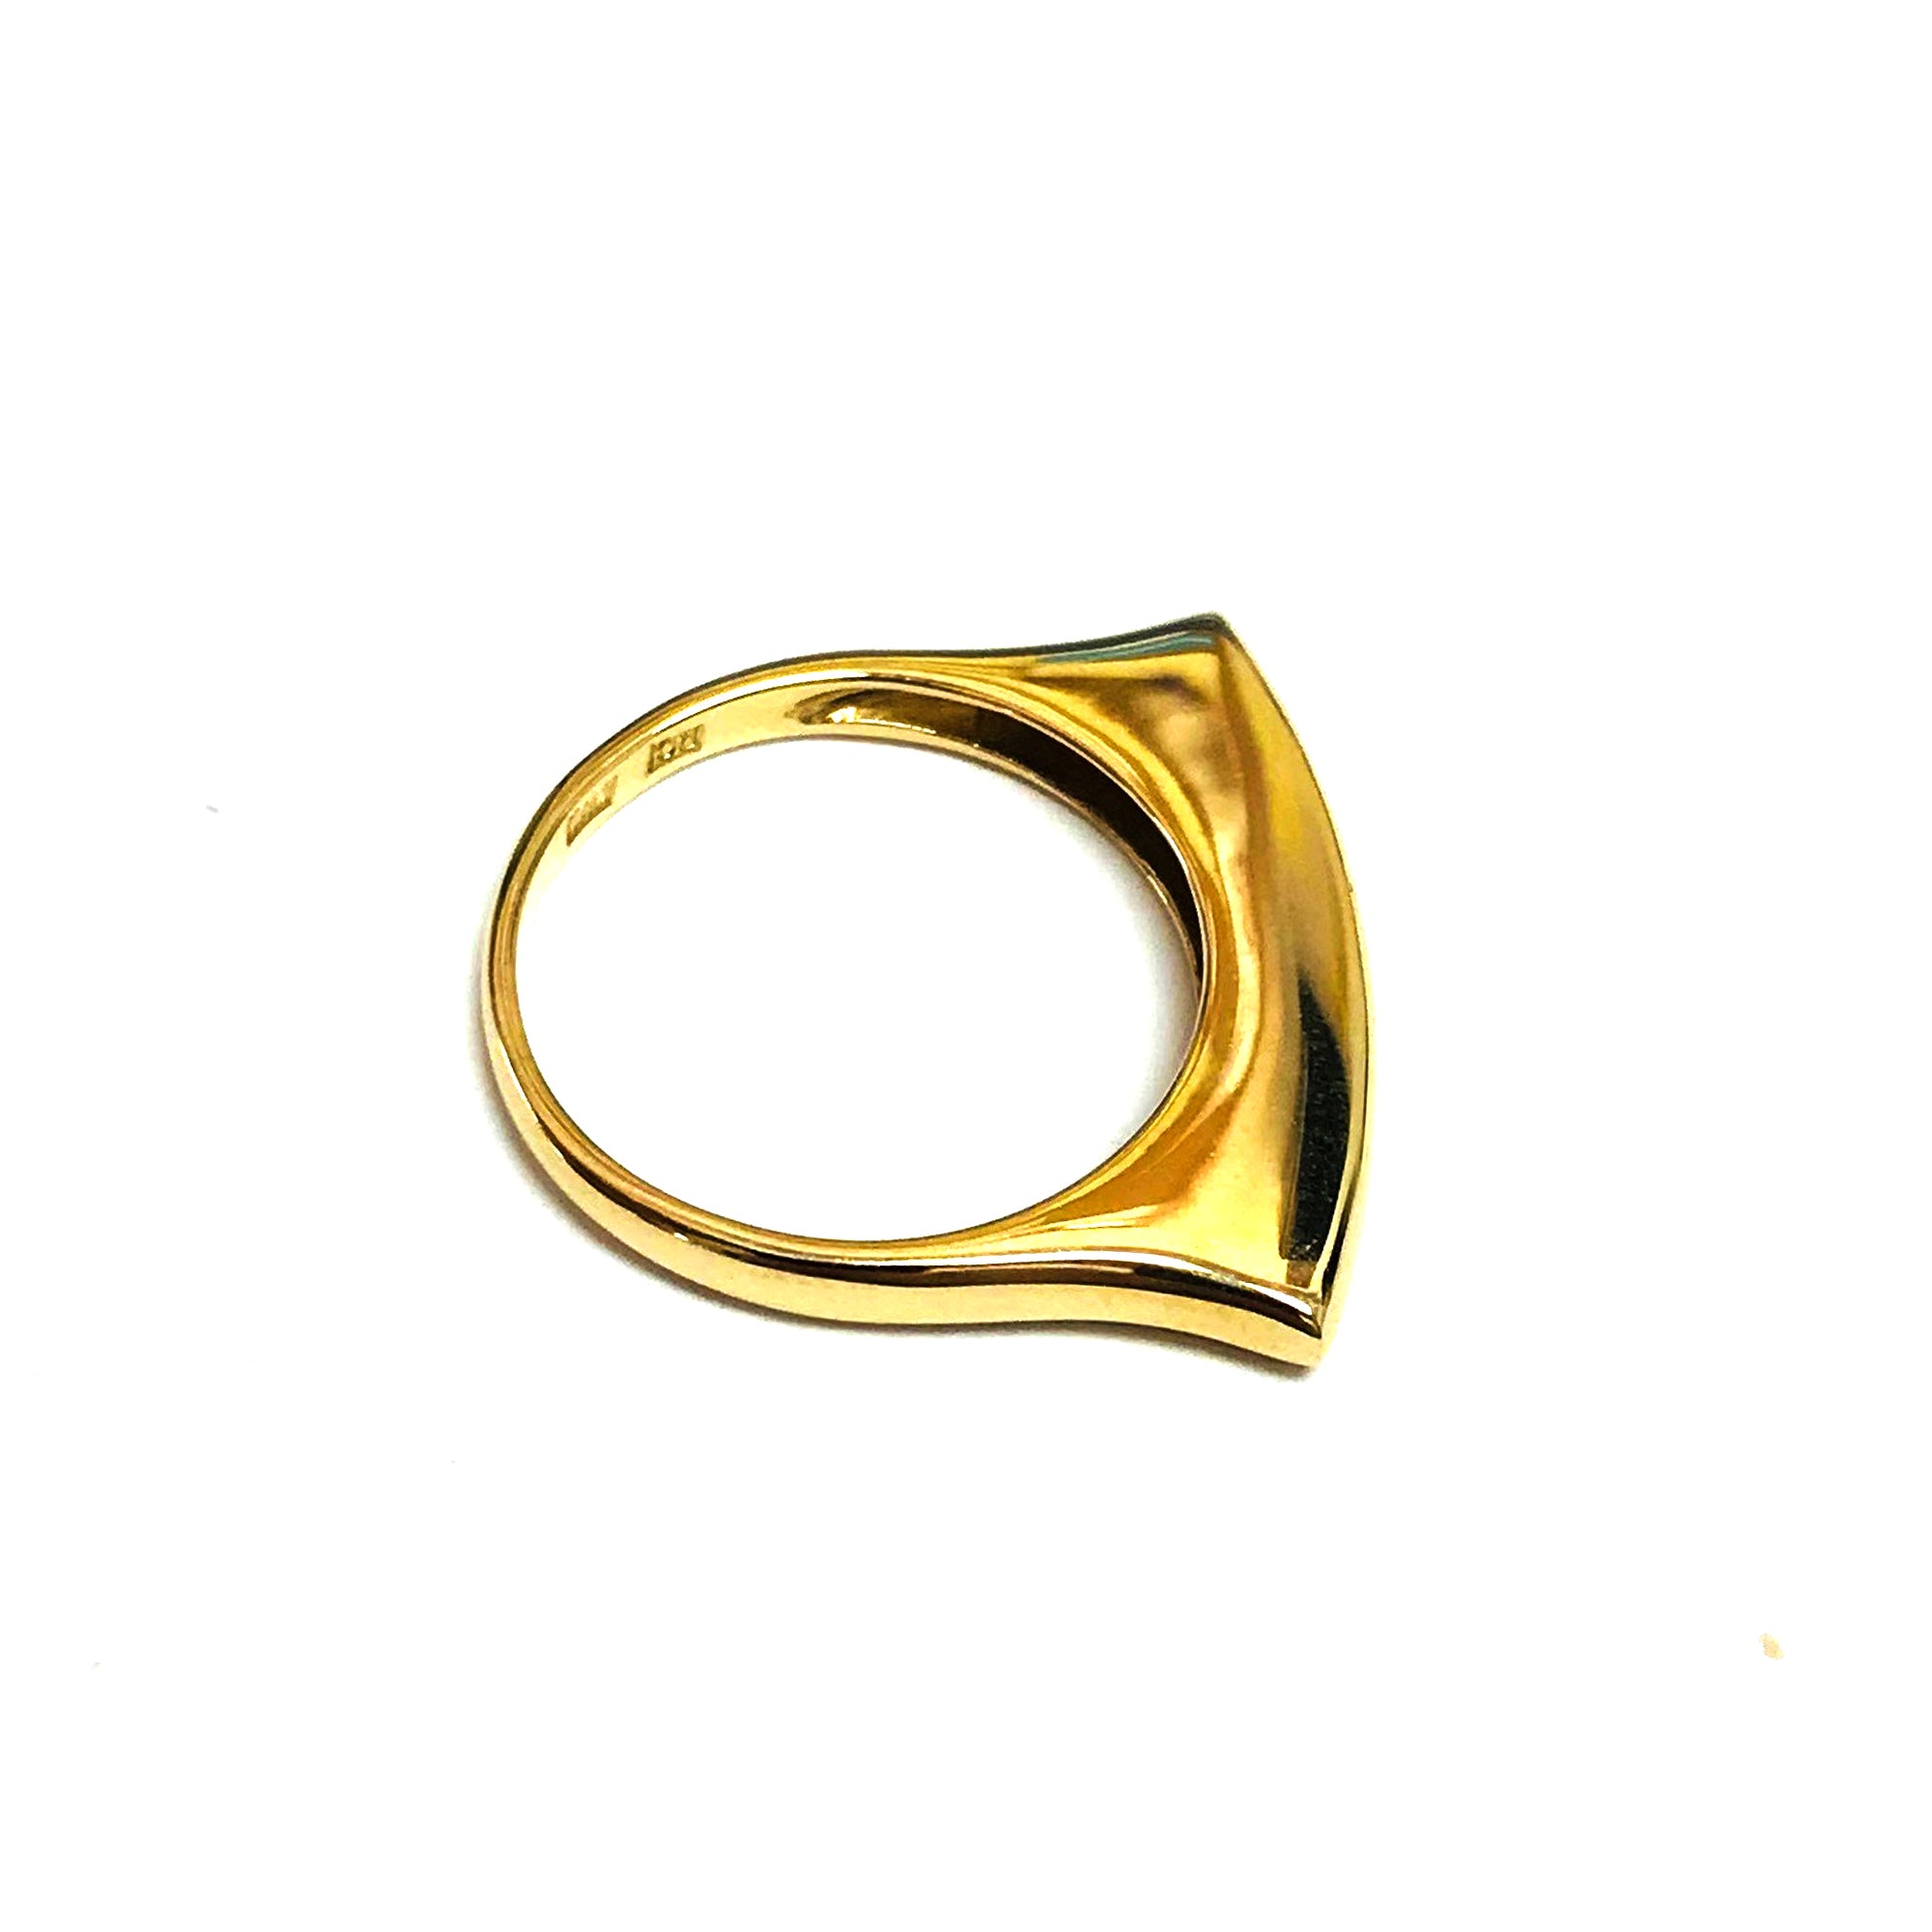 14k Yellow Gold Square Bar Ring, Size 7 fine designer jewelry for men and women